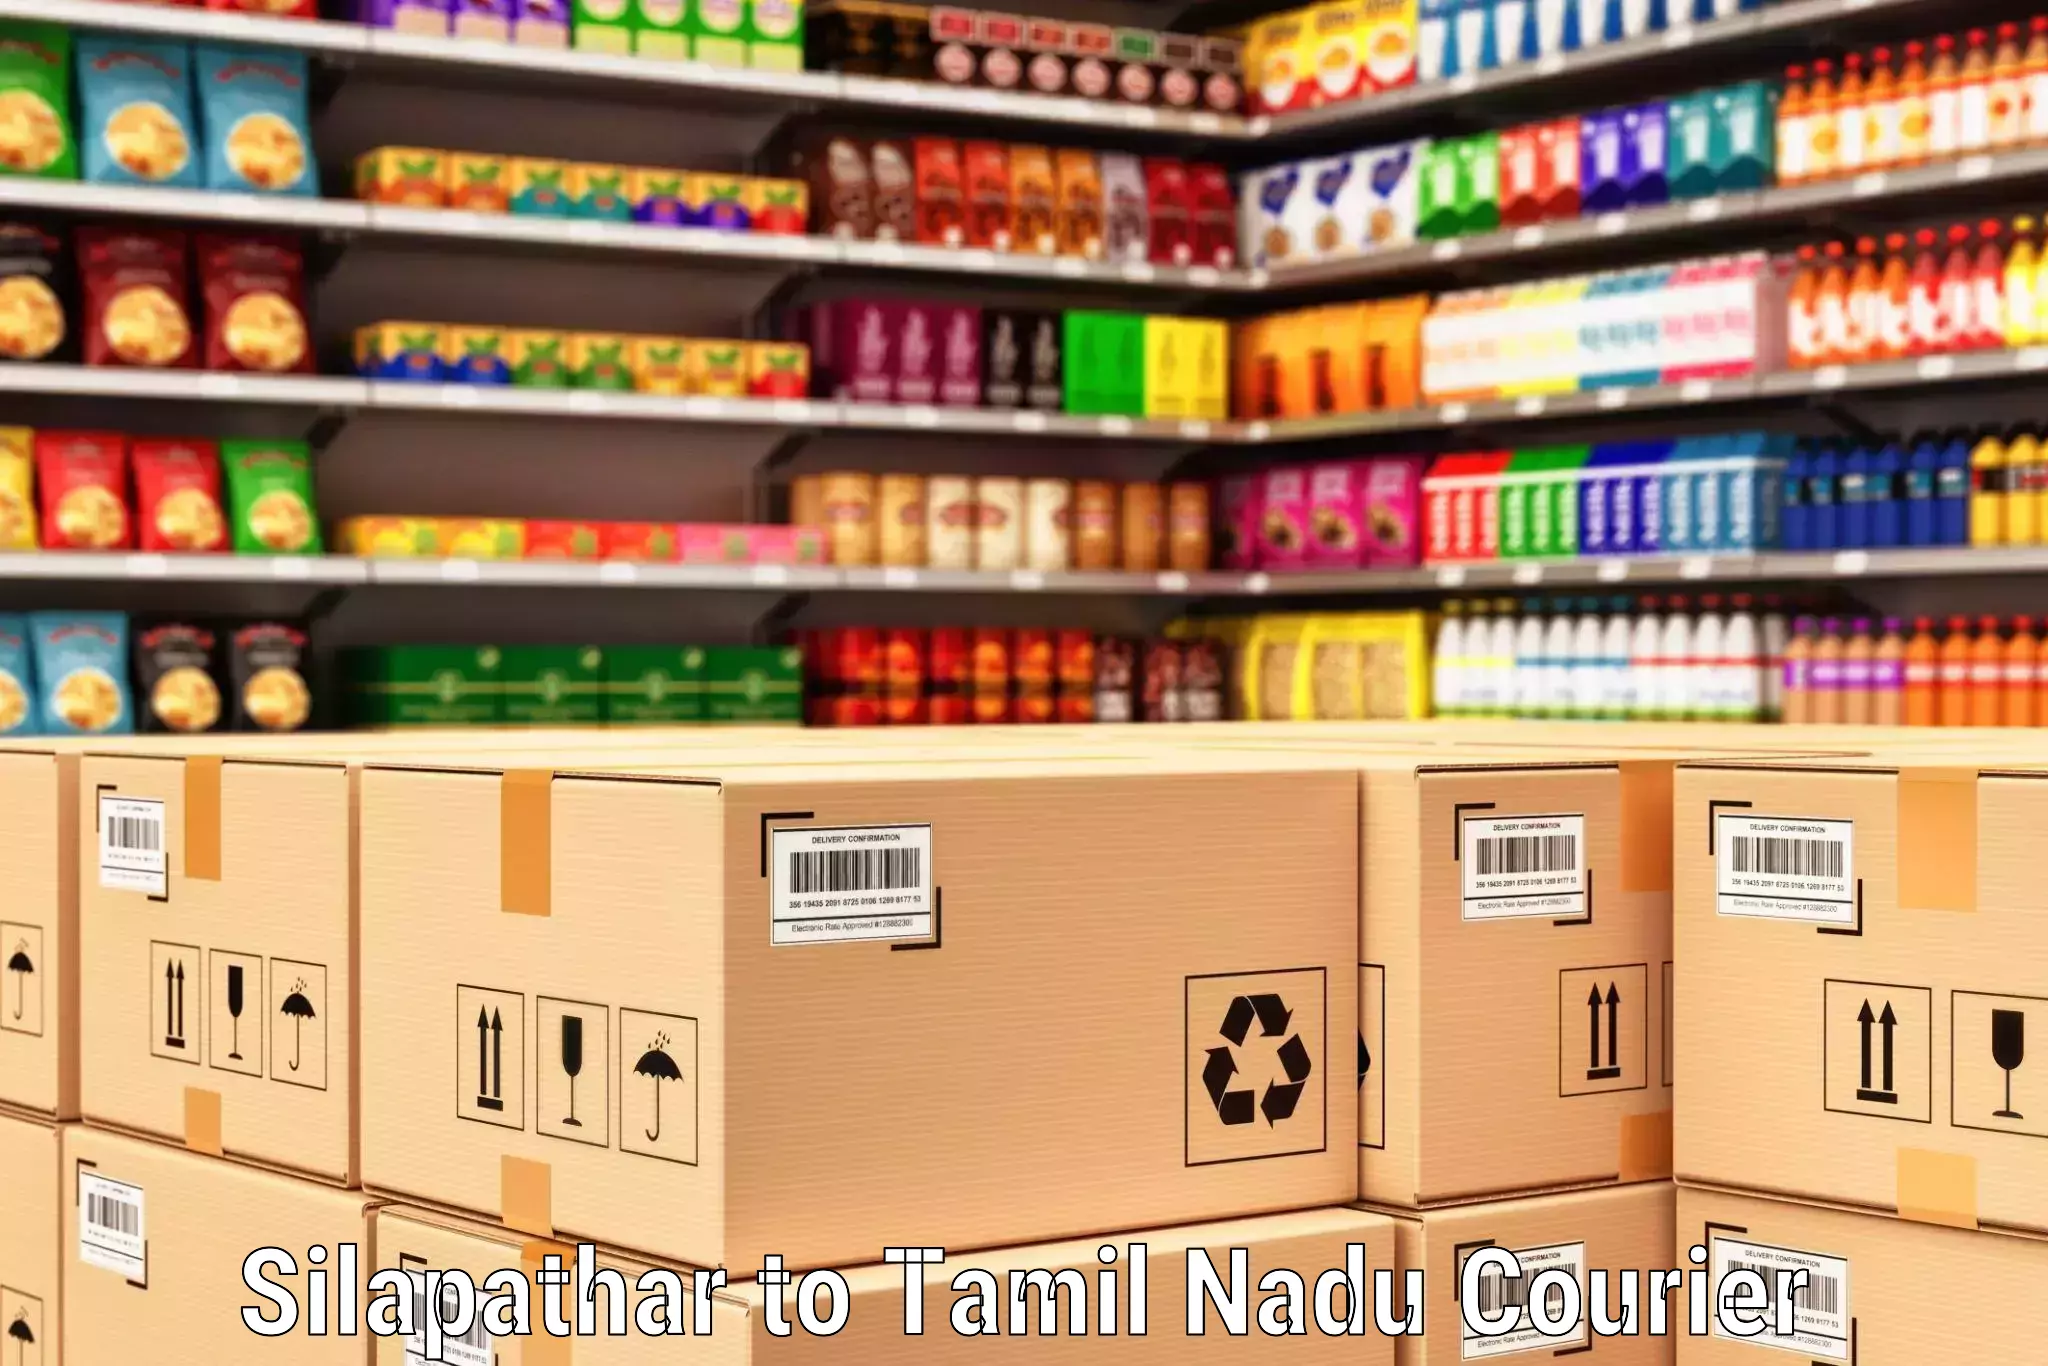 State-of-the-art courier technology Silapathar to Dindigul